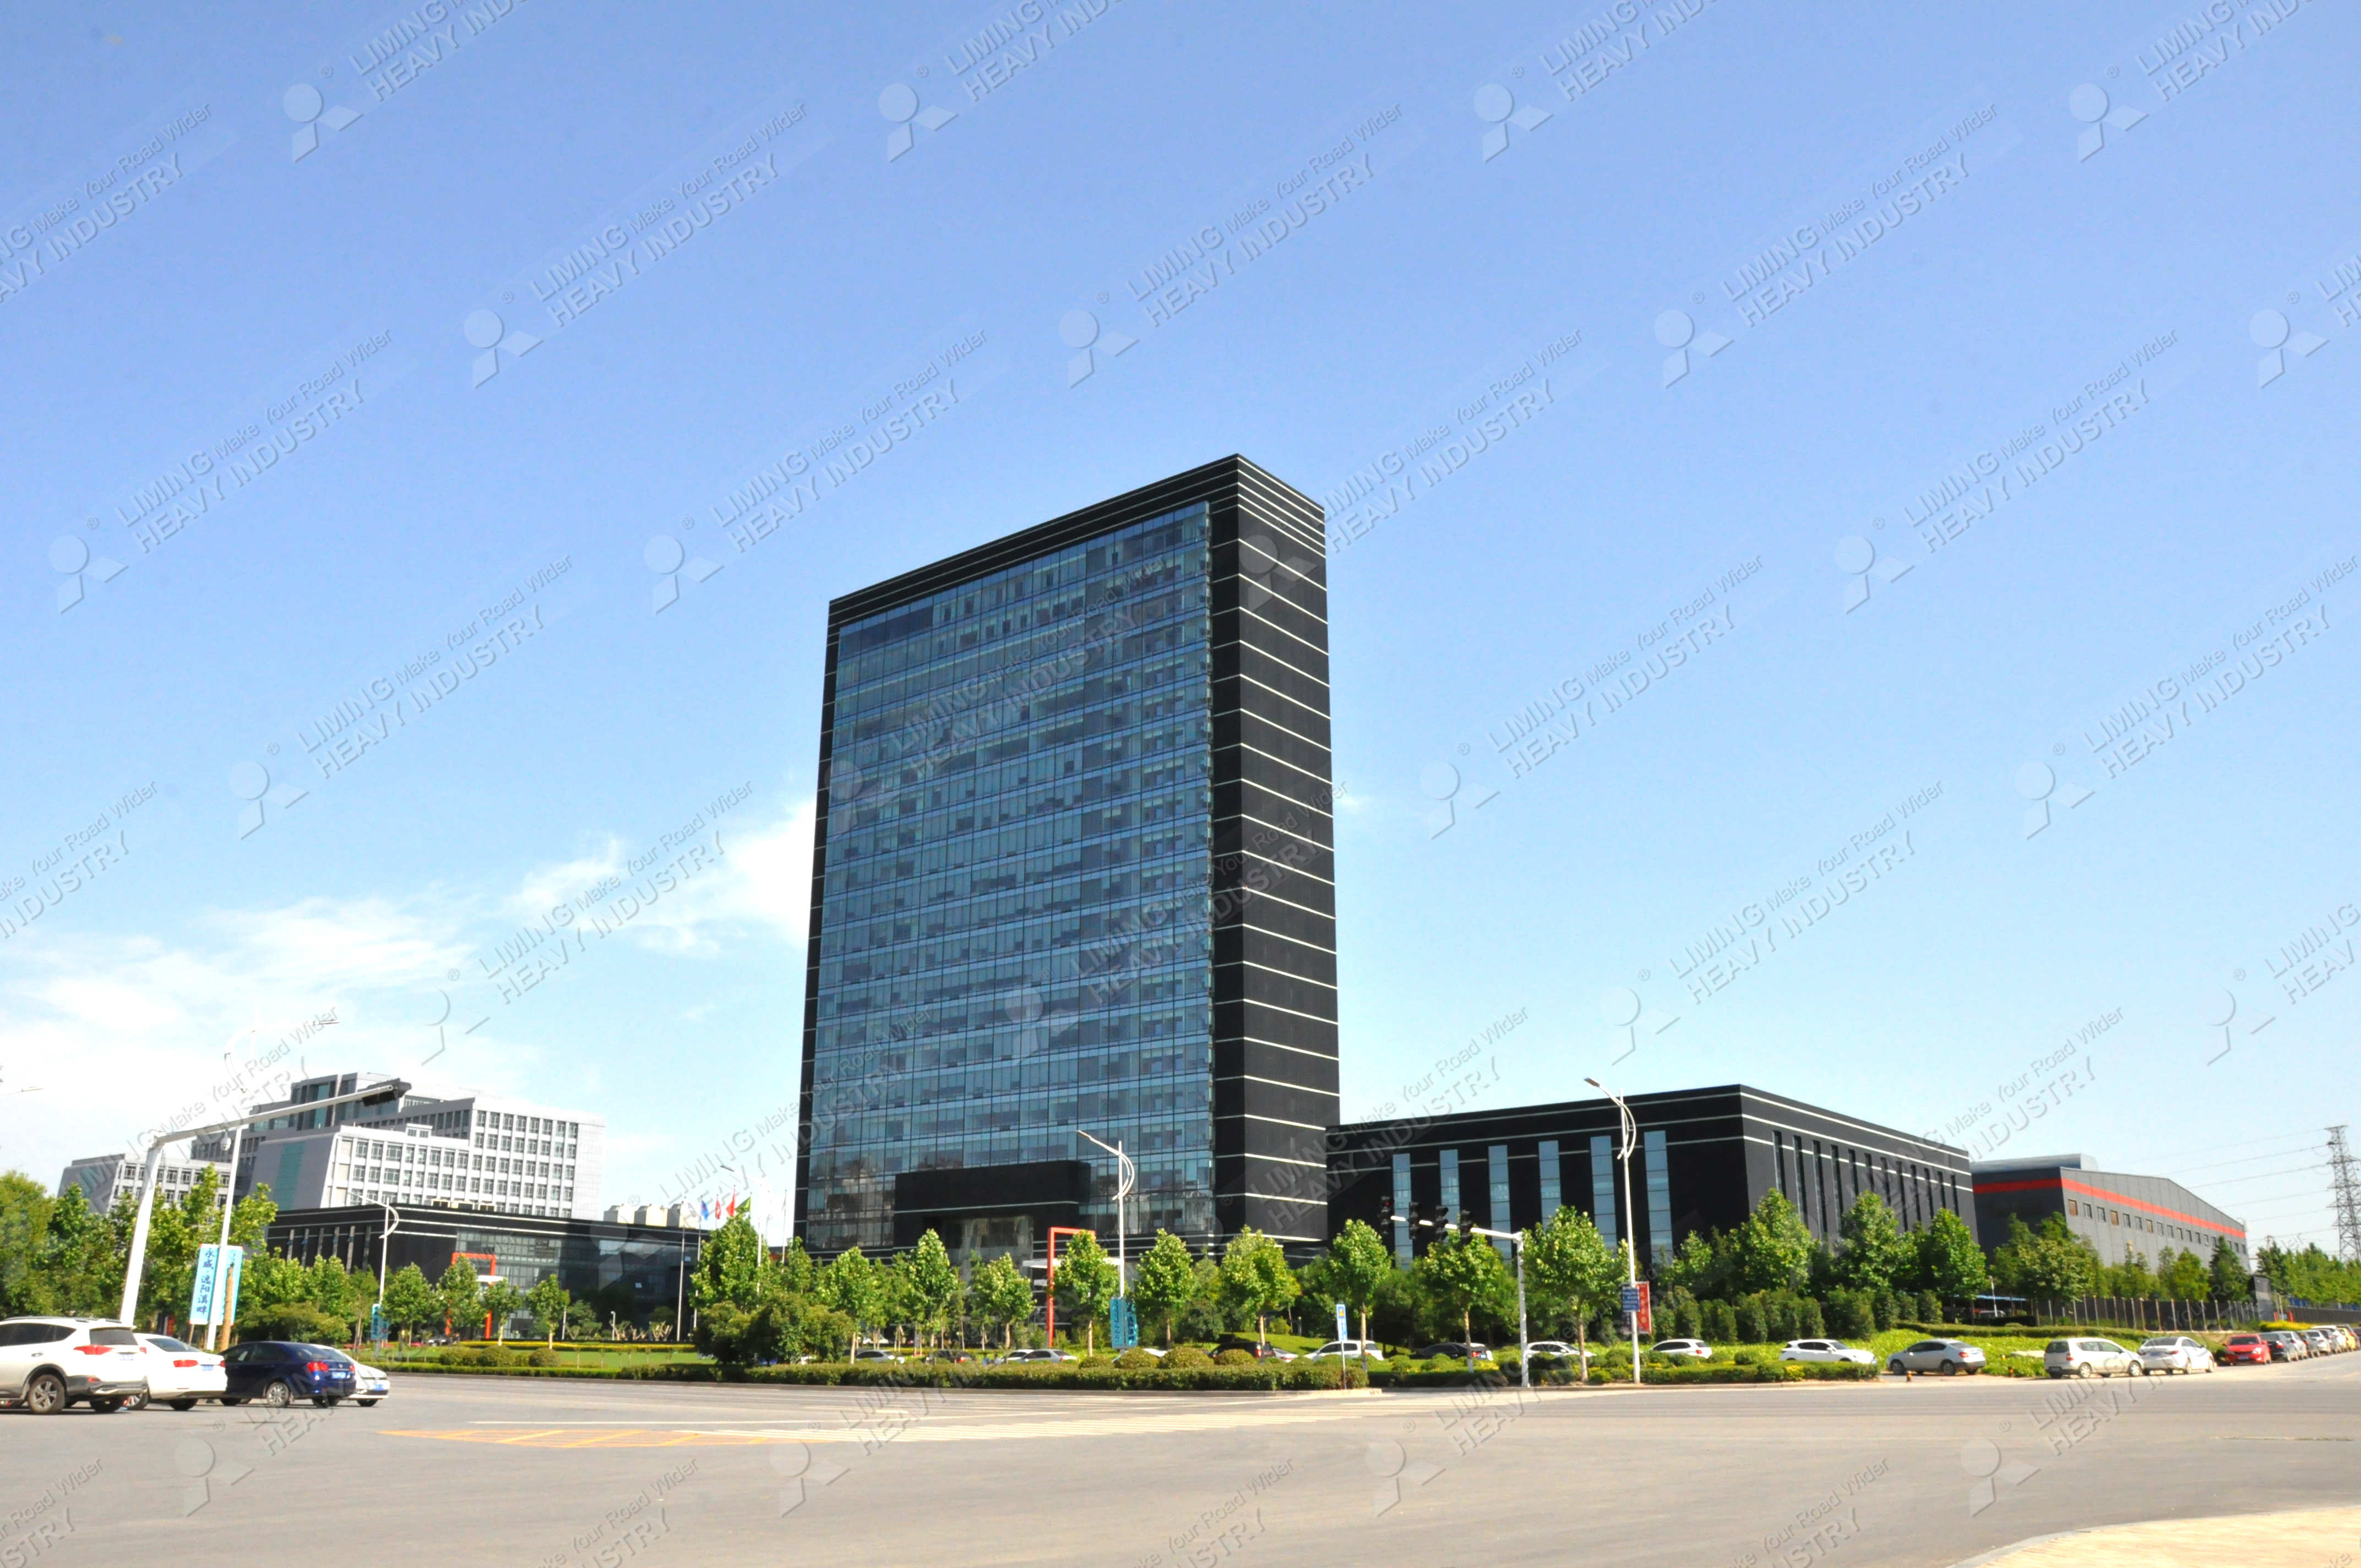 Liming Heavy Industry headquarters building